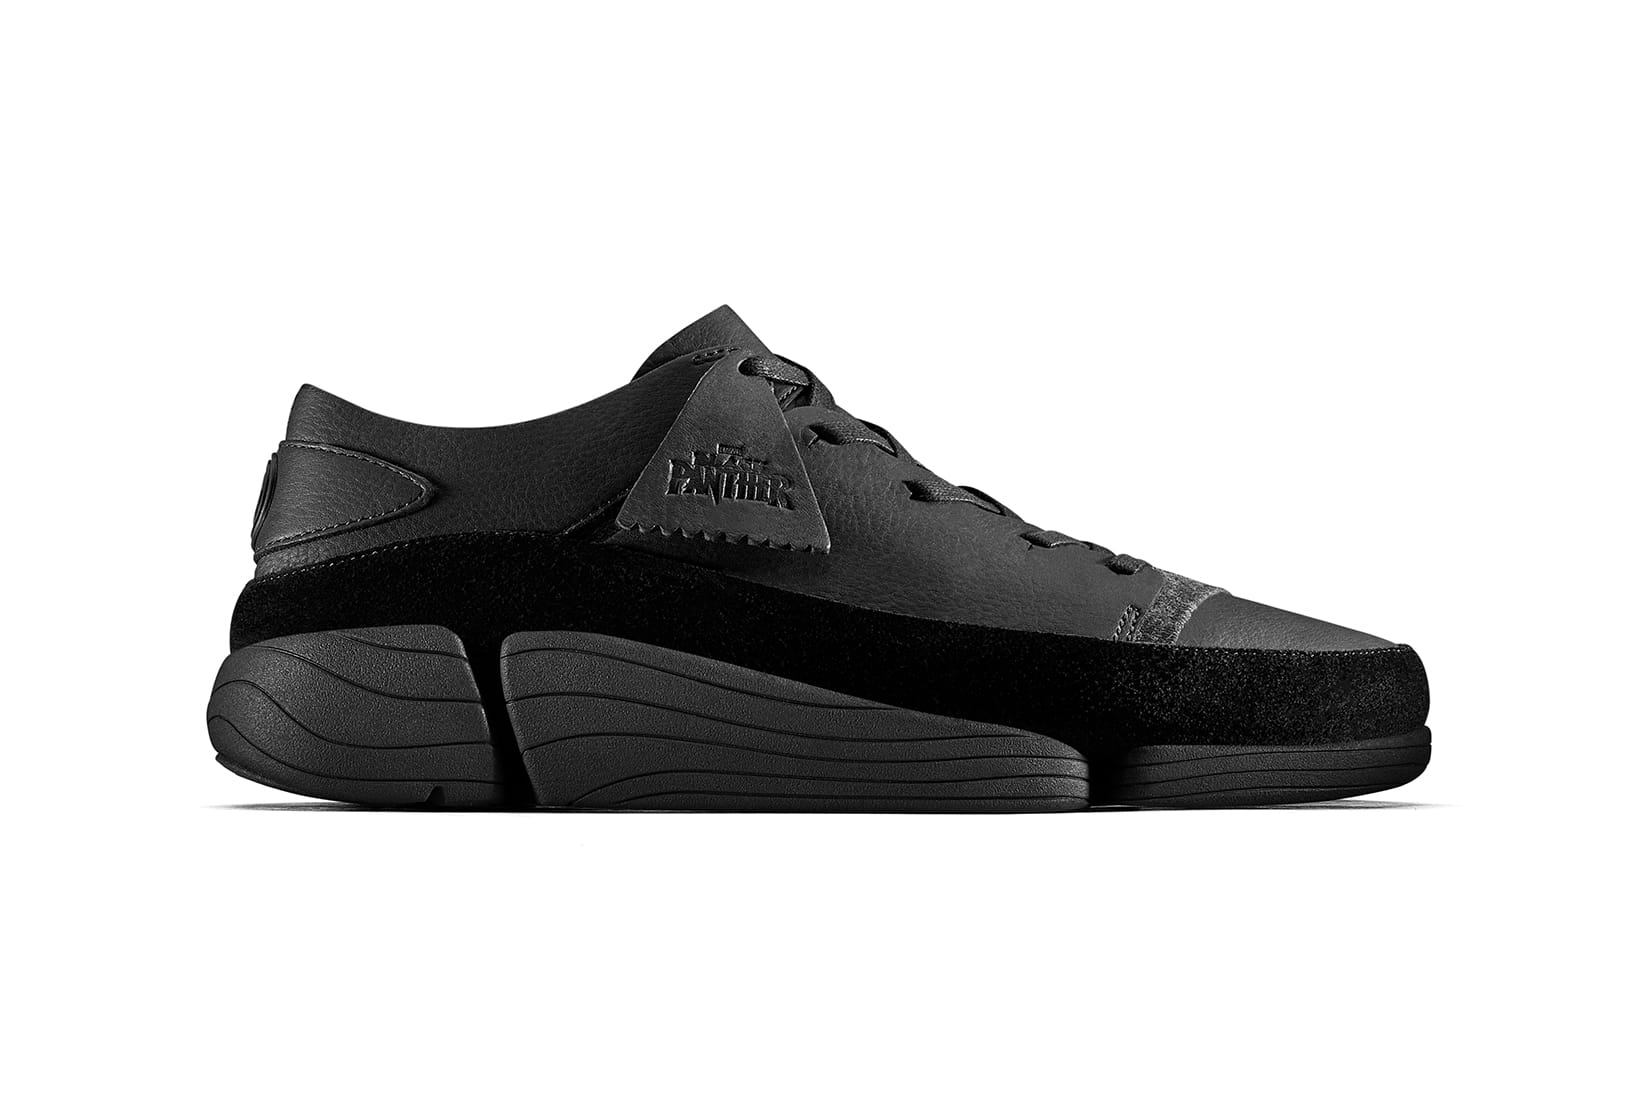 clarks black panther sneakers